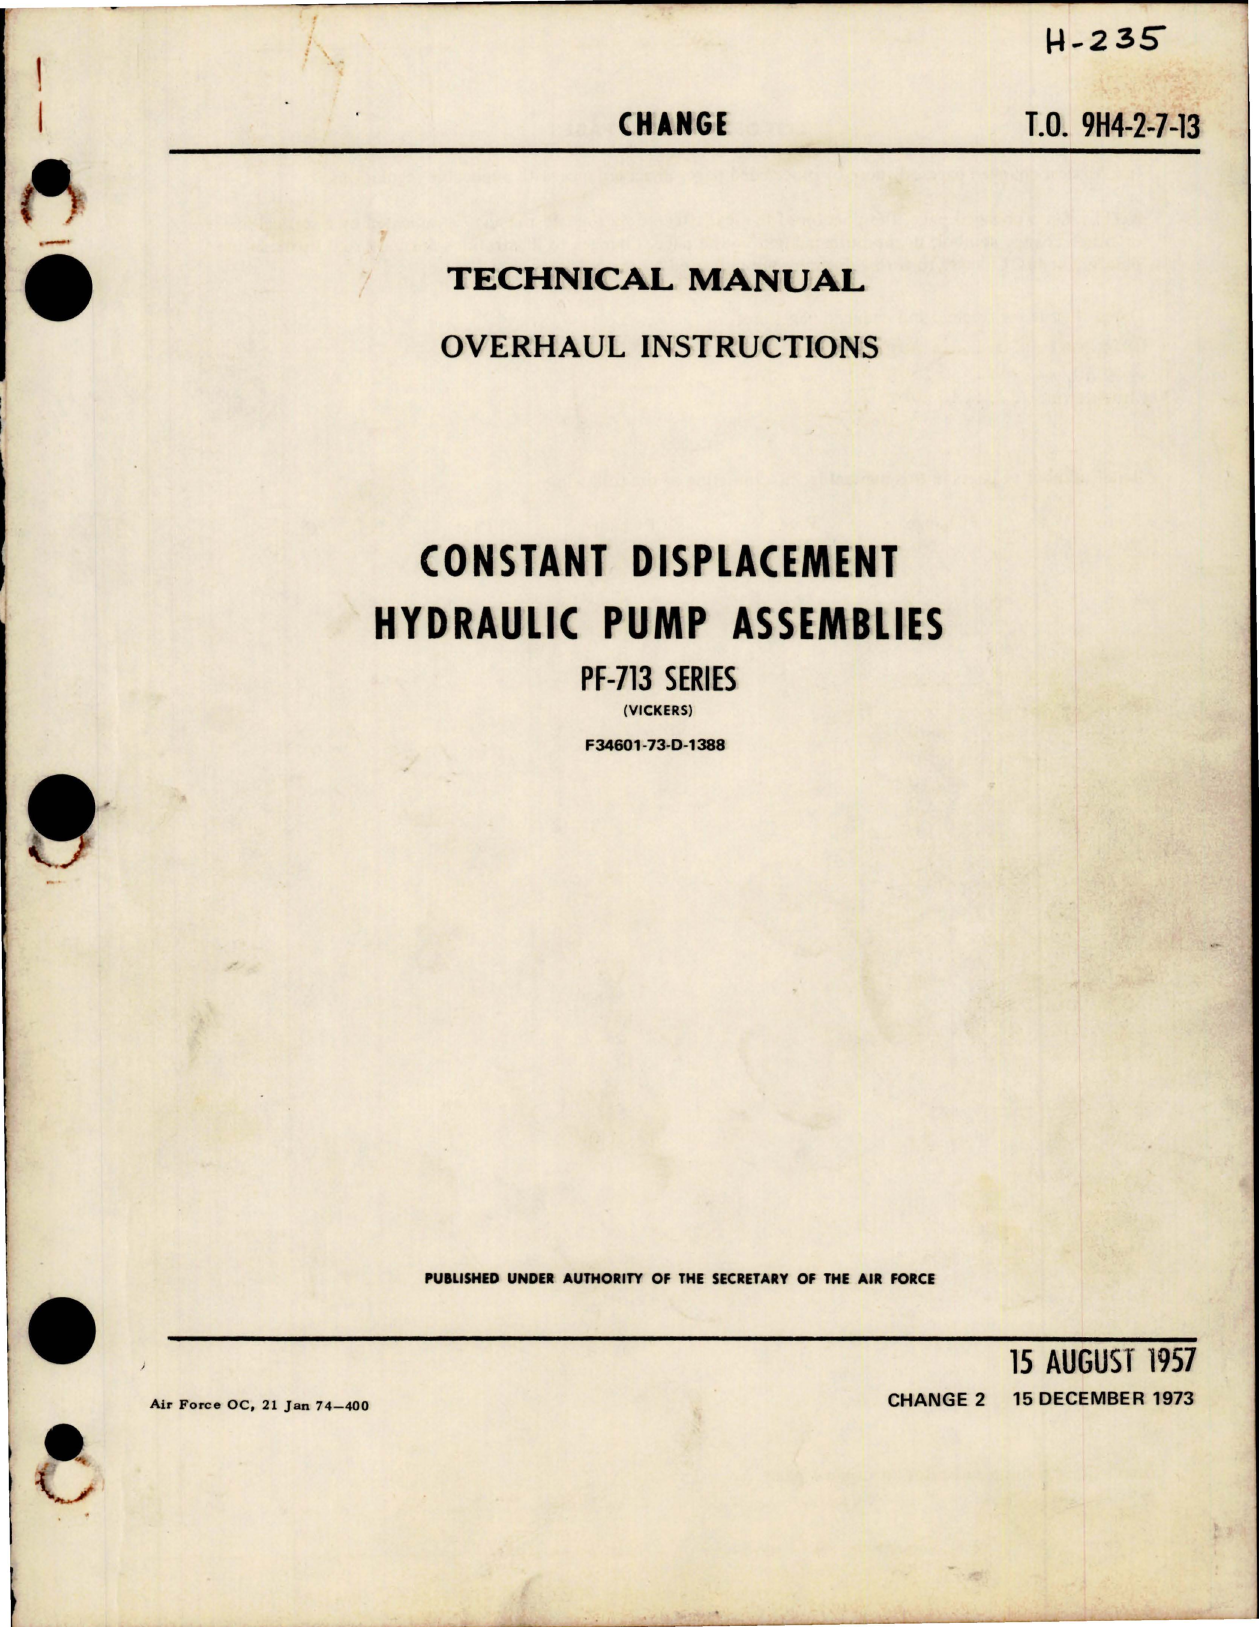 Sample page 1 from AirCorps Library document: Overhaul Instructions for Constant Displacement Hydraulic Pump Assemblies - PF-713 Series 